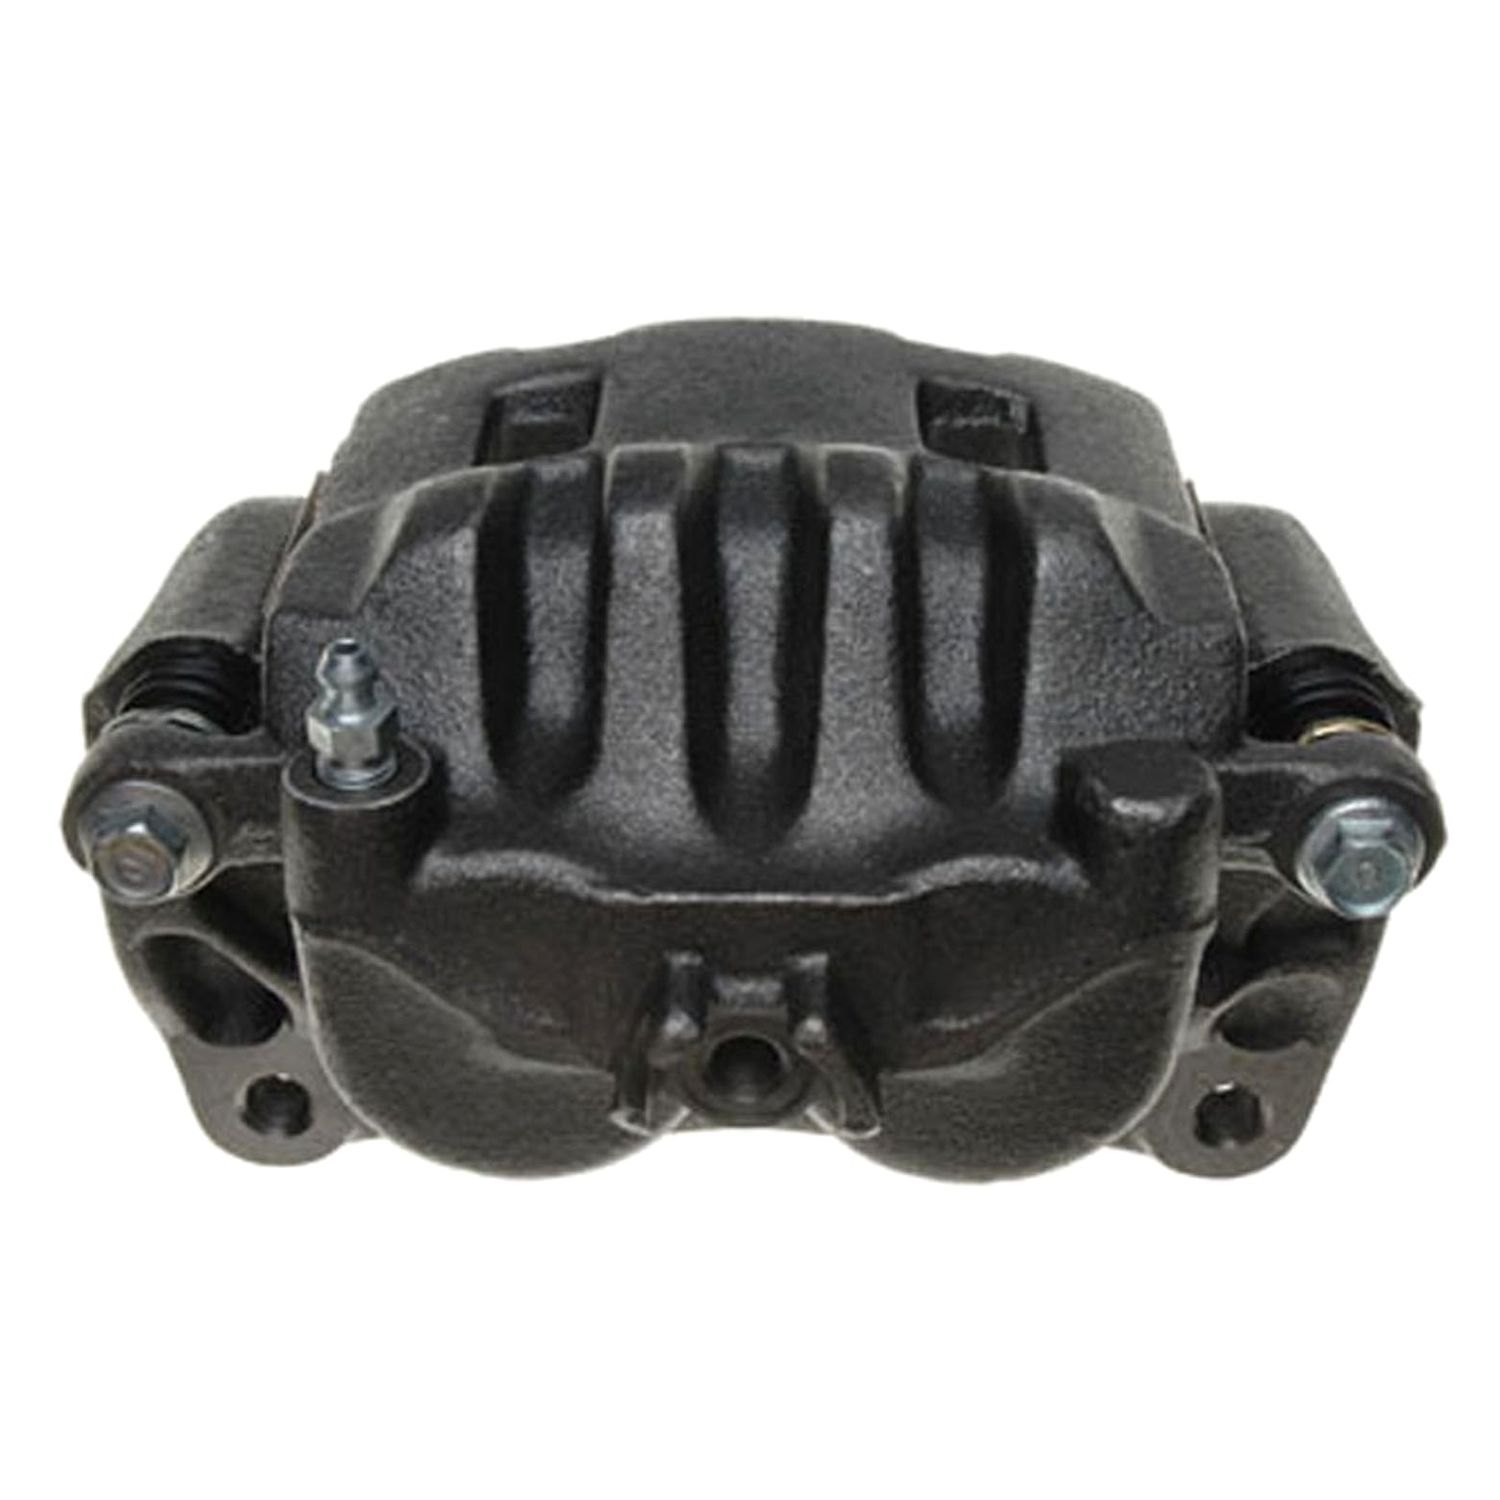 Loaded Non-Coated Remanufactured ACDelco 18R2513F1 Professional Rear Disc Brake Caliper with Pads